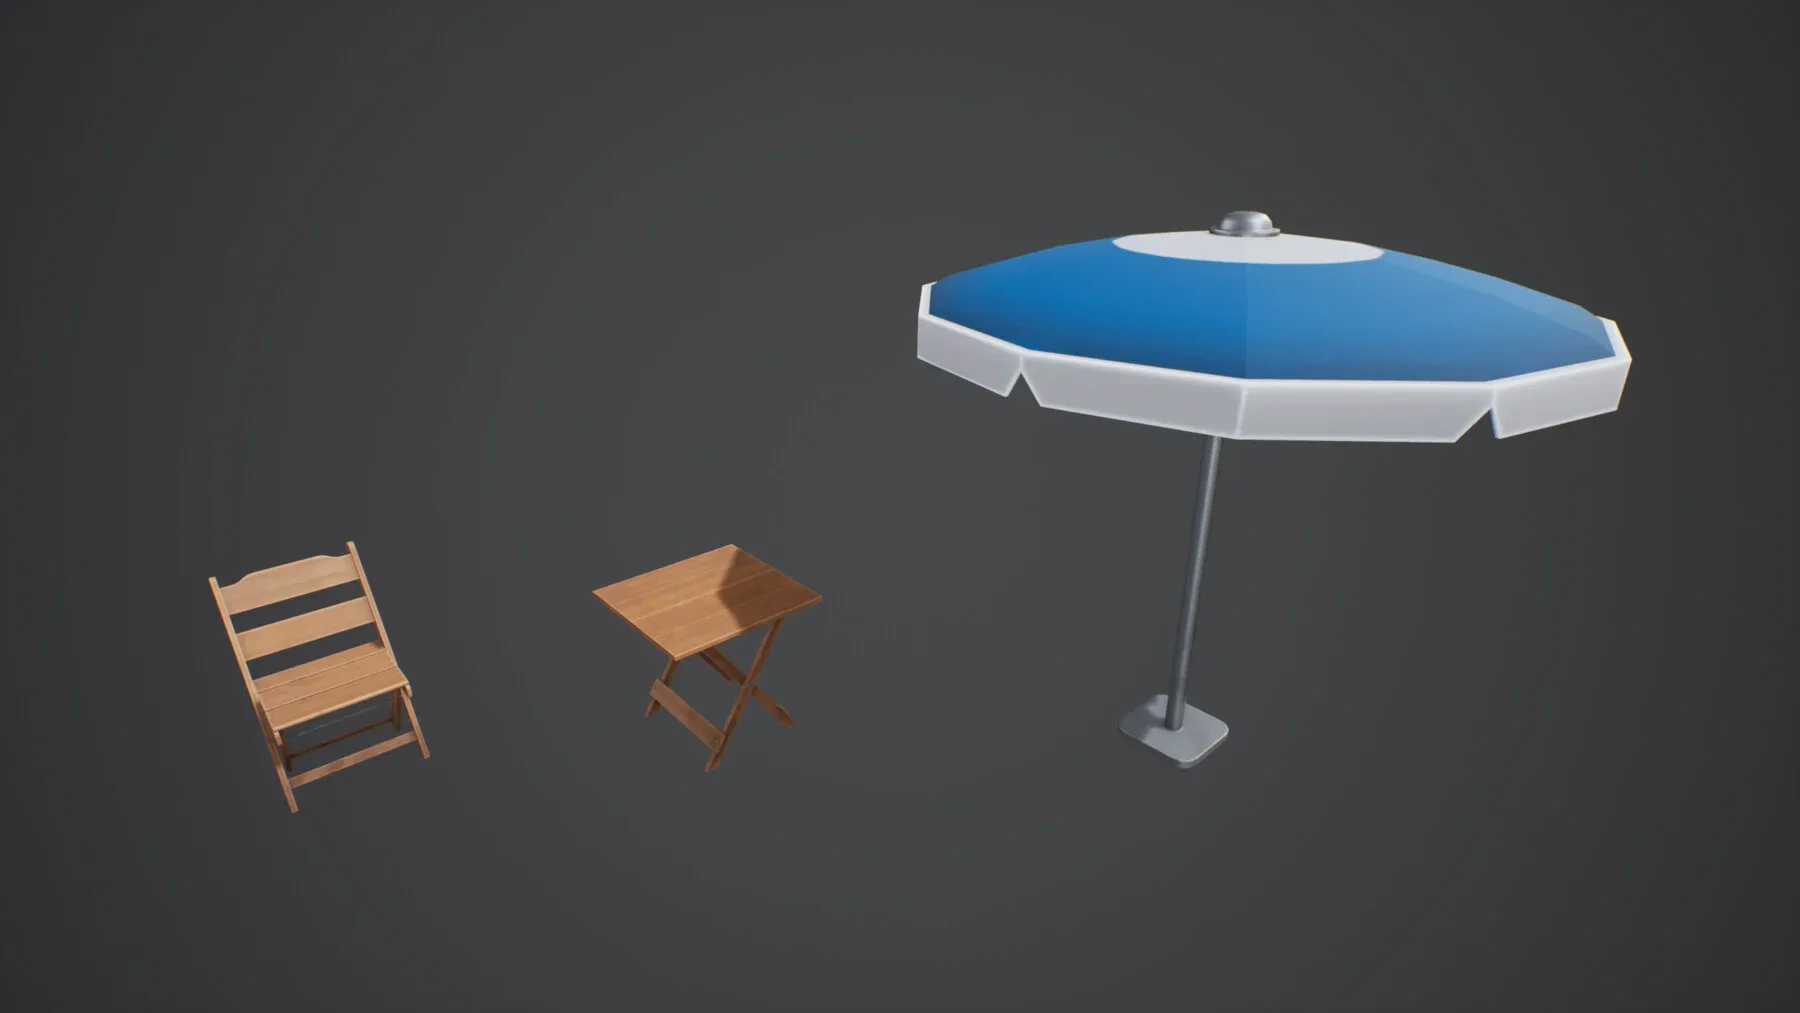 Stylized Chair, Table and Umbrella